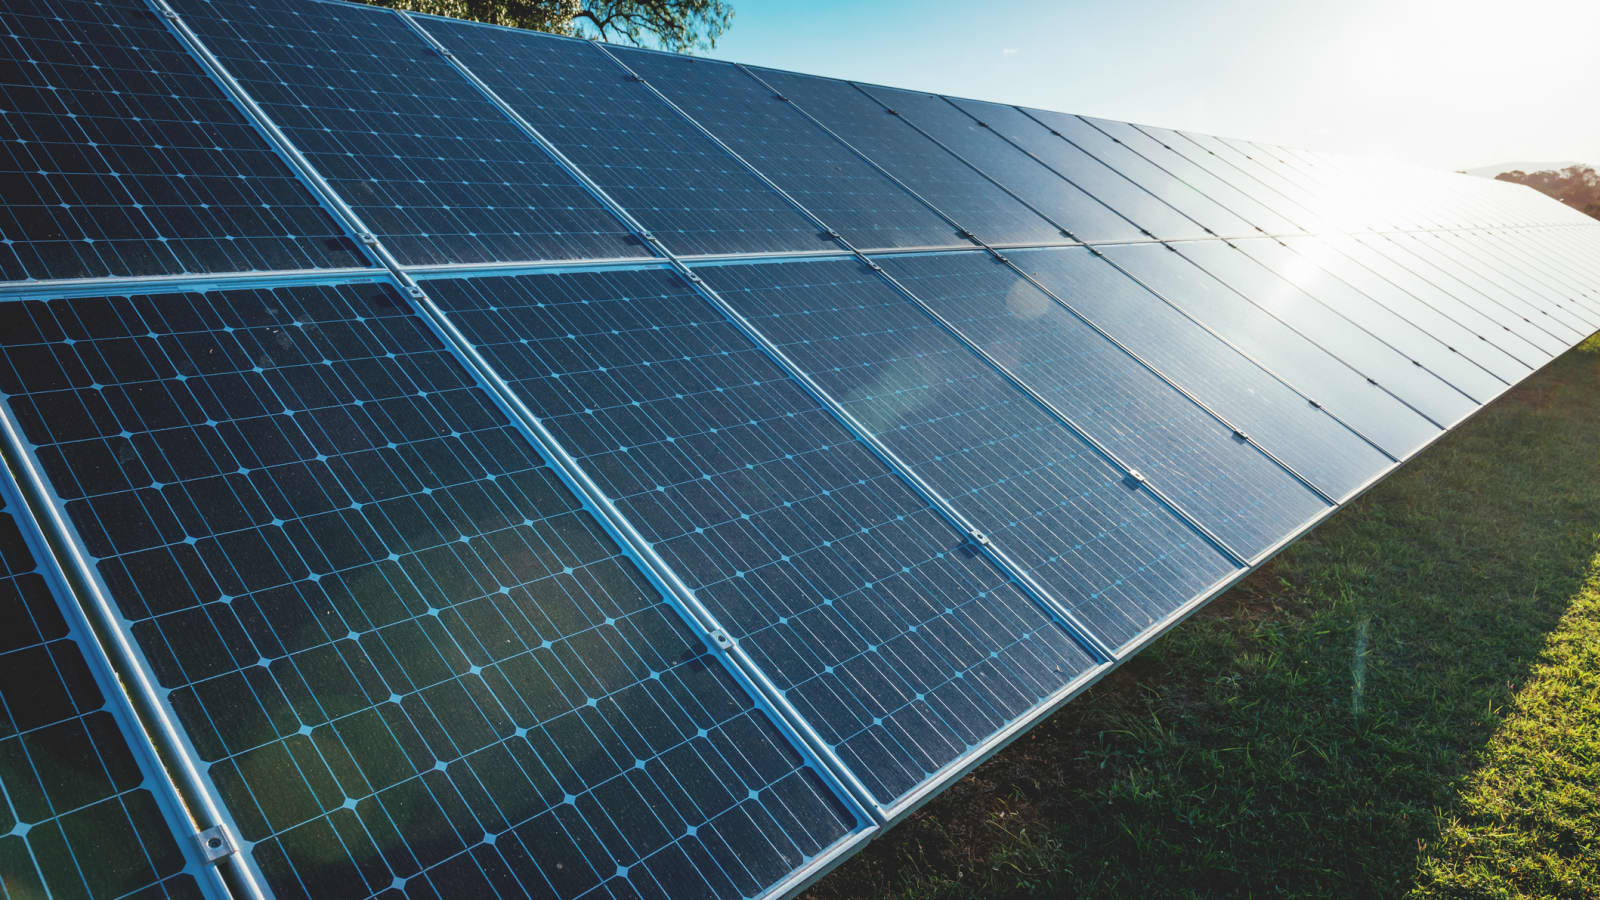 Surging Demand For Solar Will Boost 3 Metals Wood Mackenzie Predicts